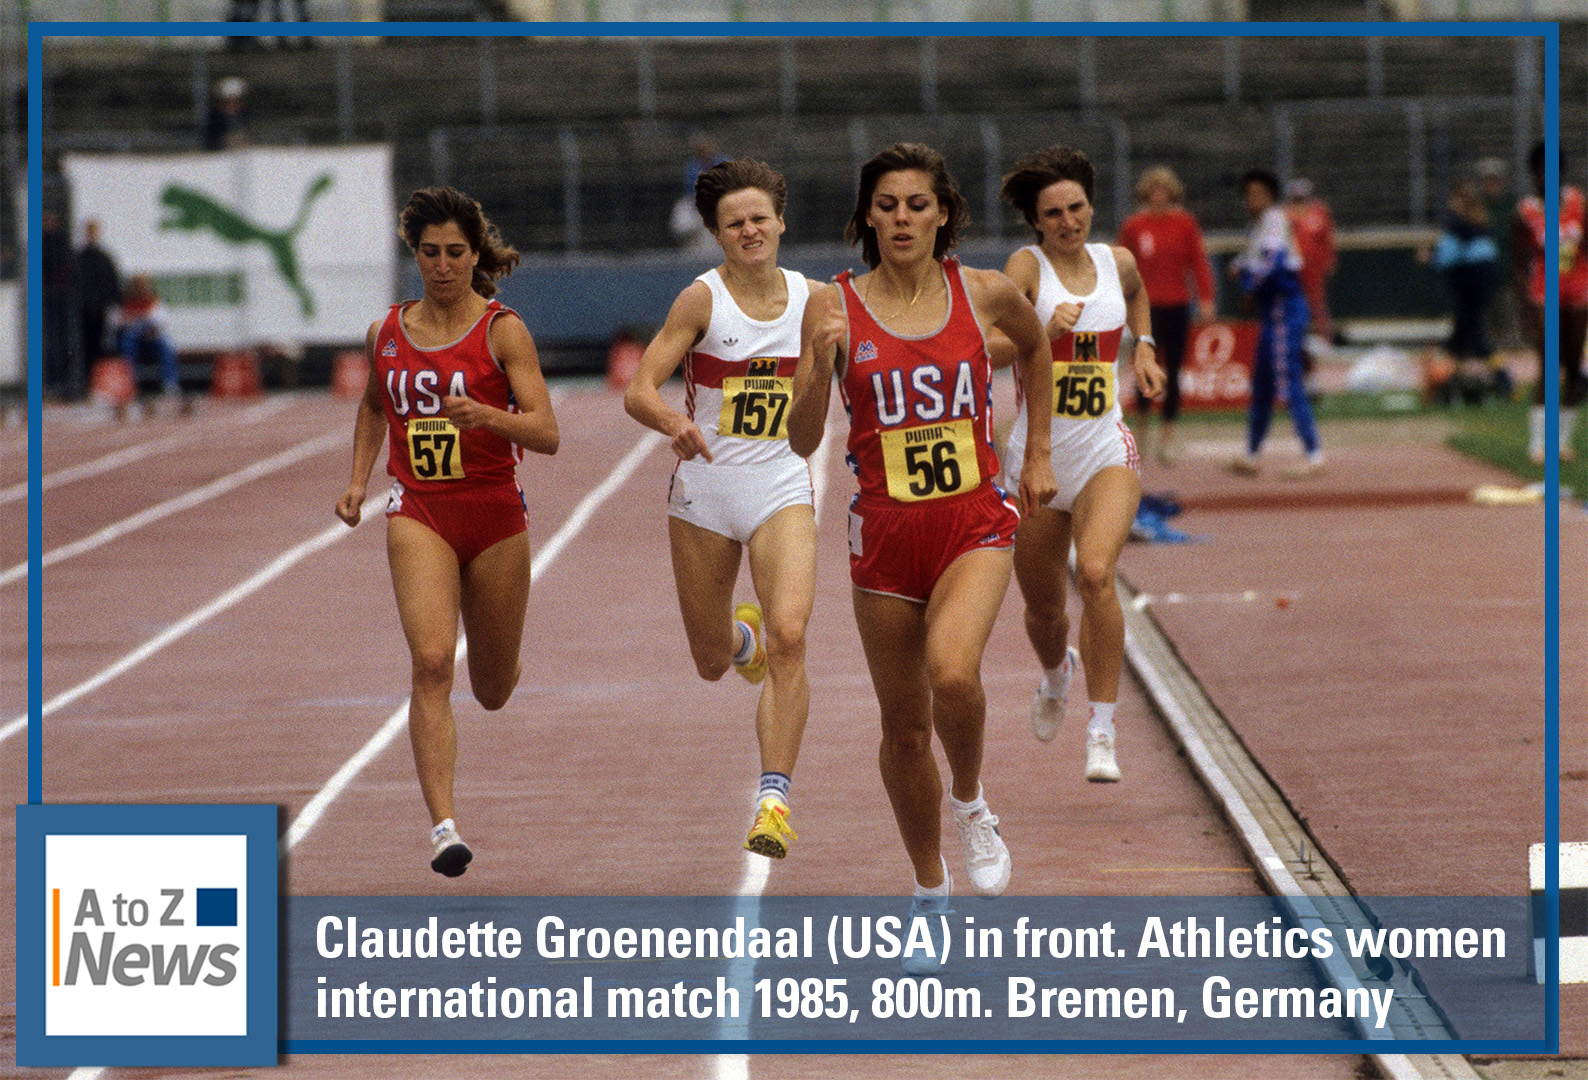 Claudette Groenendaal - 1985 800m Race in Germany - A to Z News 2-2023